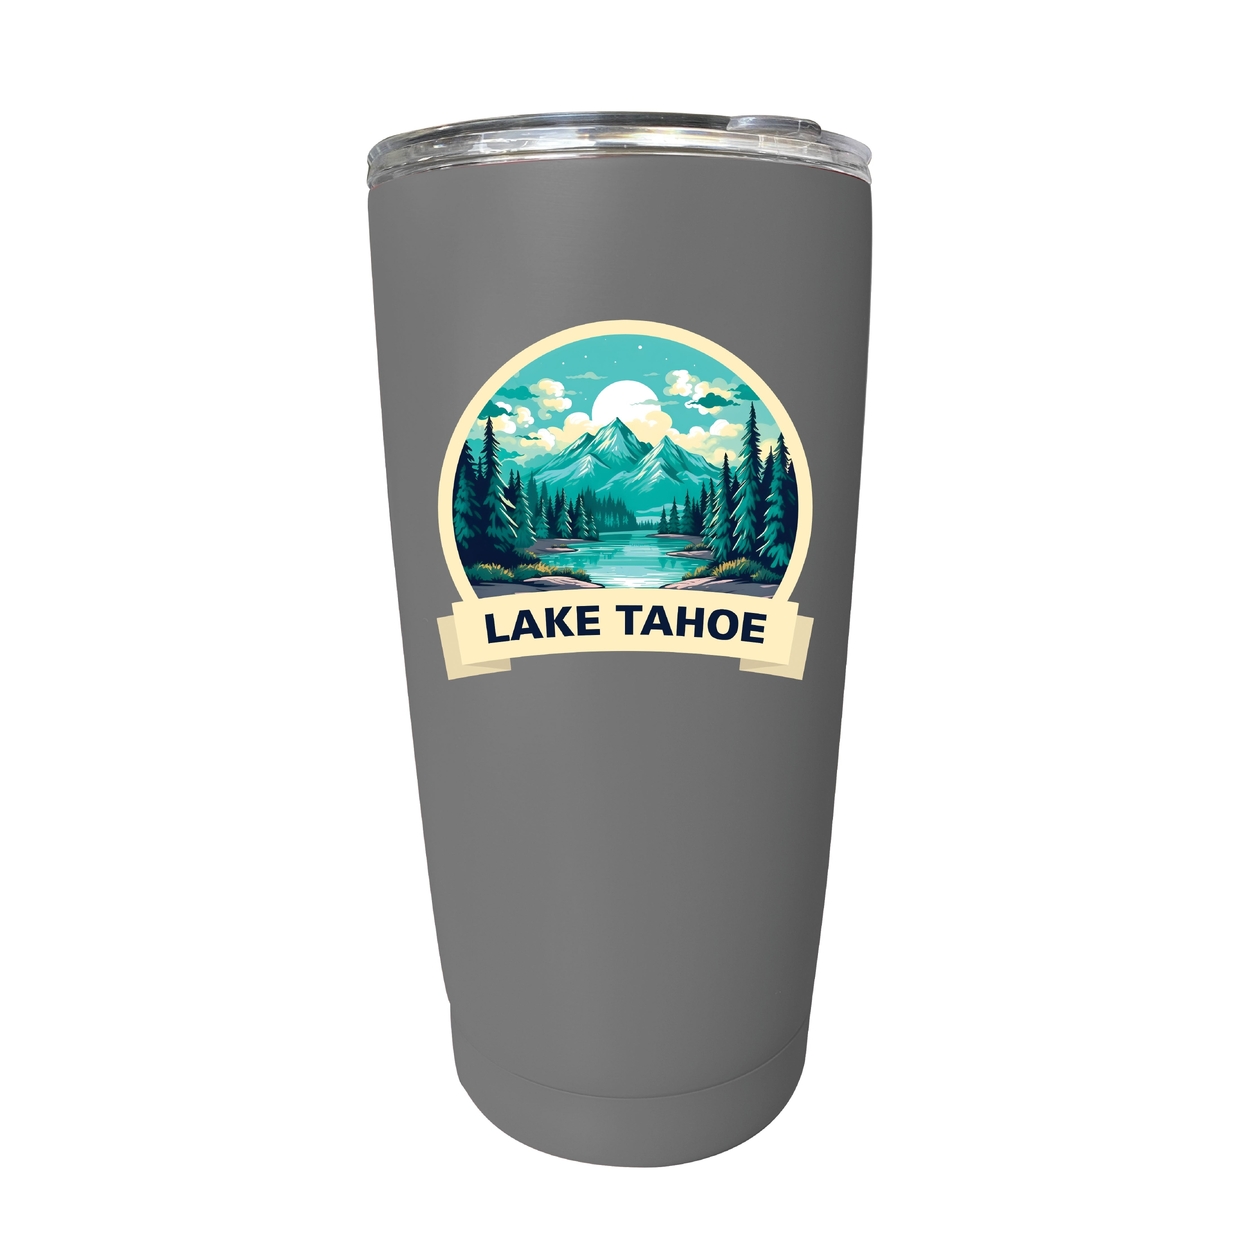 Lake Tahoe California Souvenir 16 Oz Stainless Steel Insulated Tumbler - Gray,,2-Pack